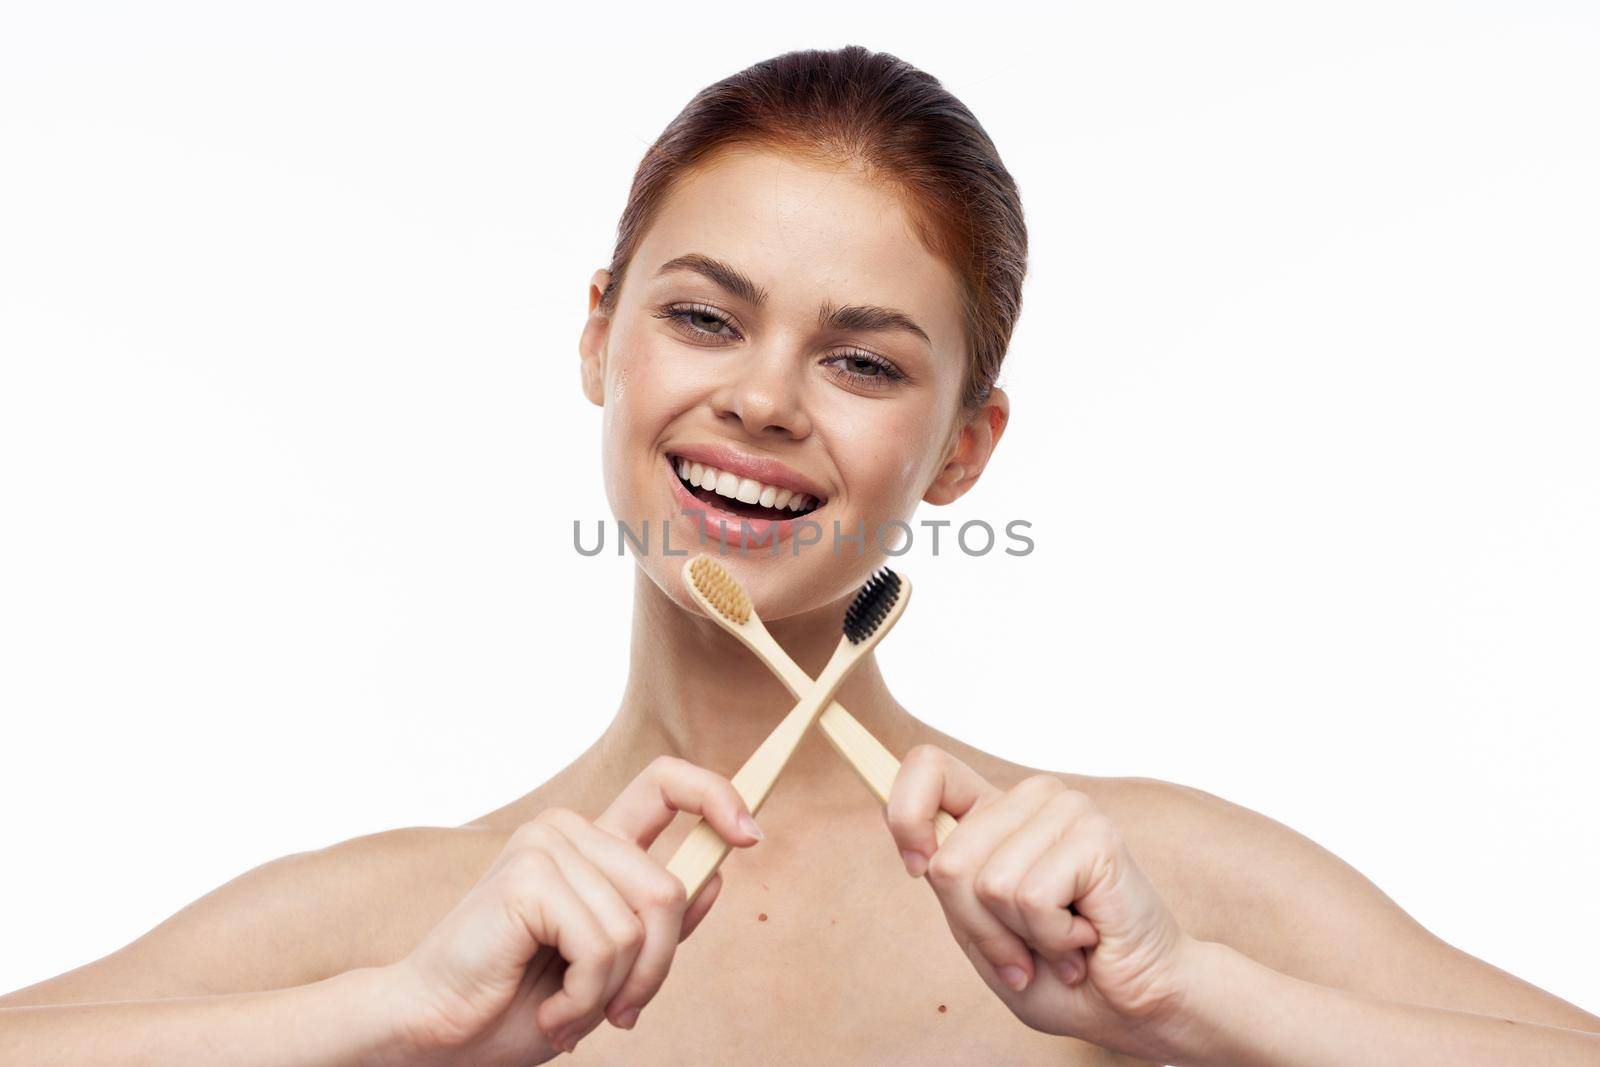 cheerful woman with bare shoulders toothbrushes hygiene oral care. High quality photo